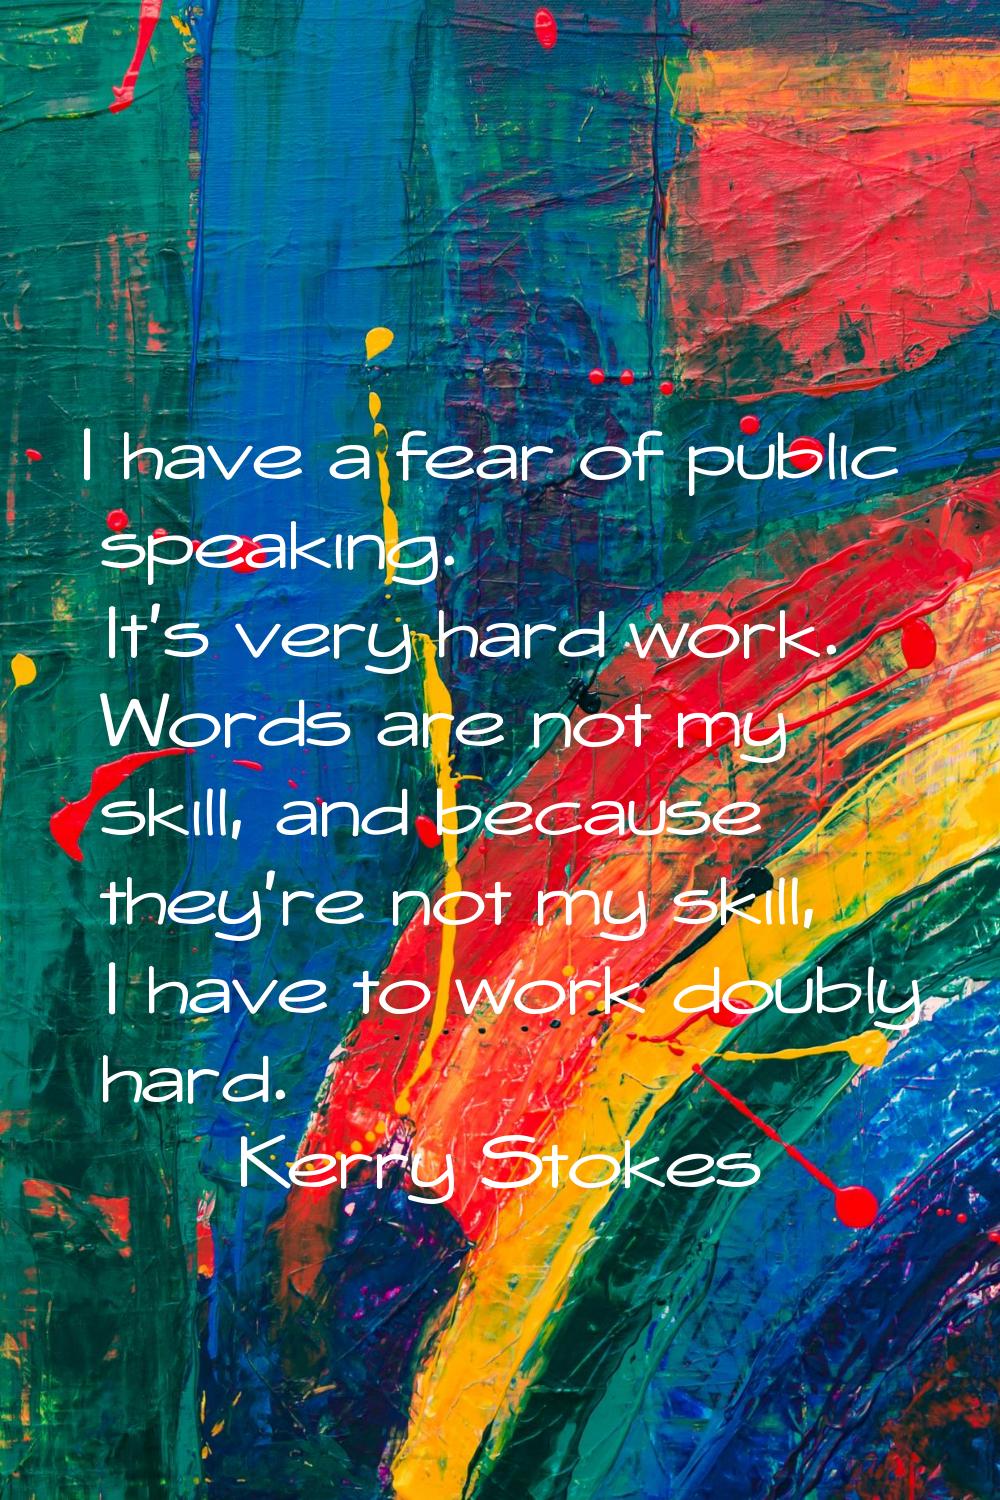 I have a fear of public speaking. It's very hard work. Words are not my skill, and because they're 